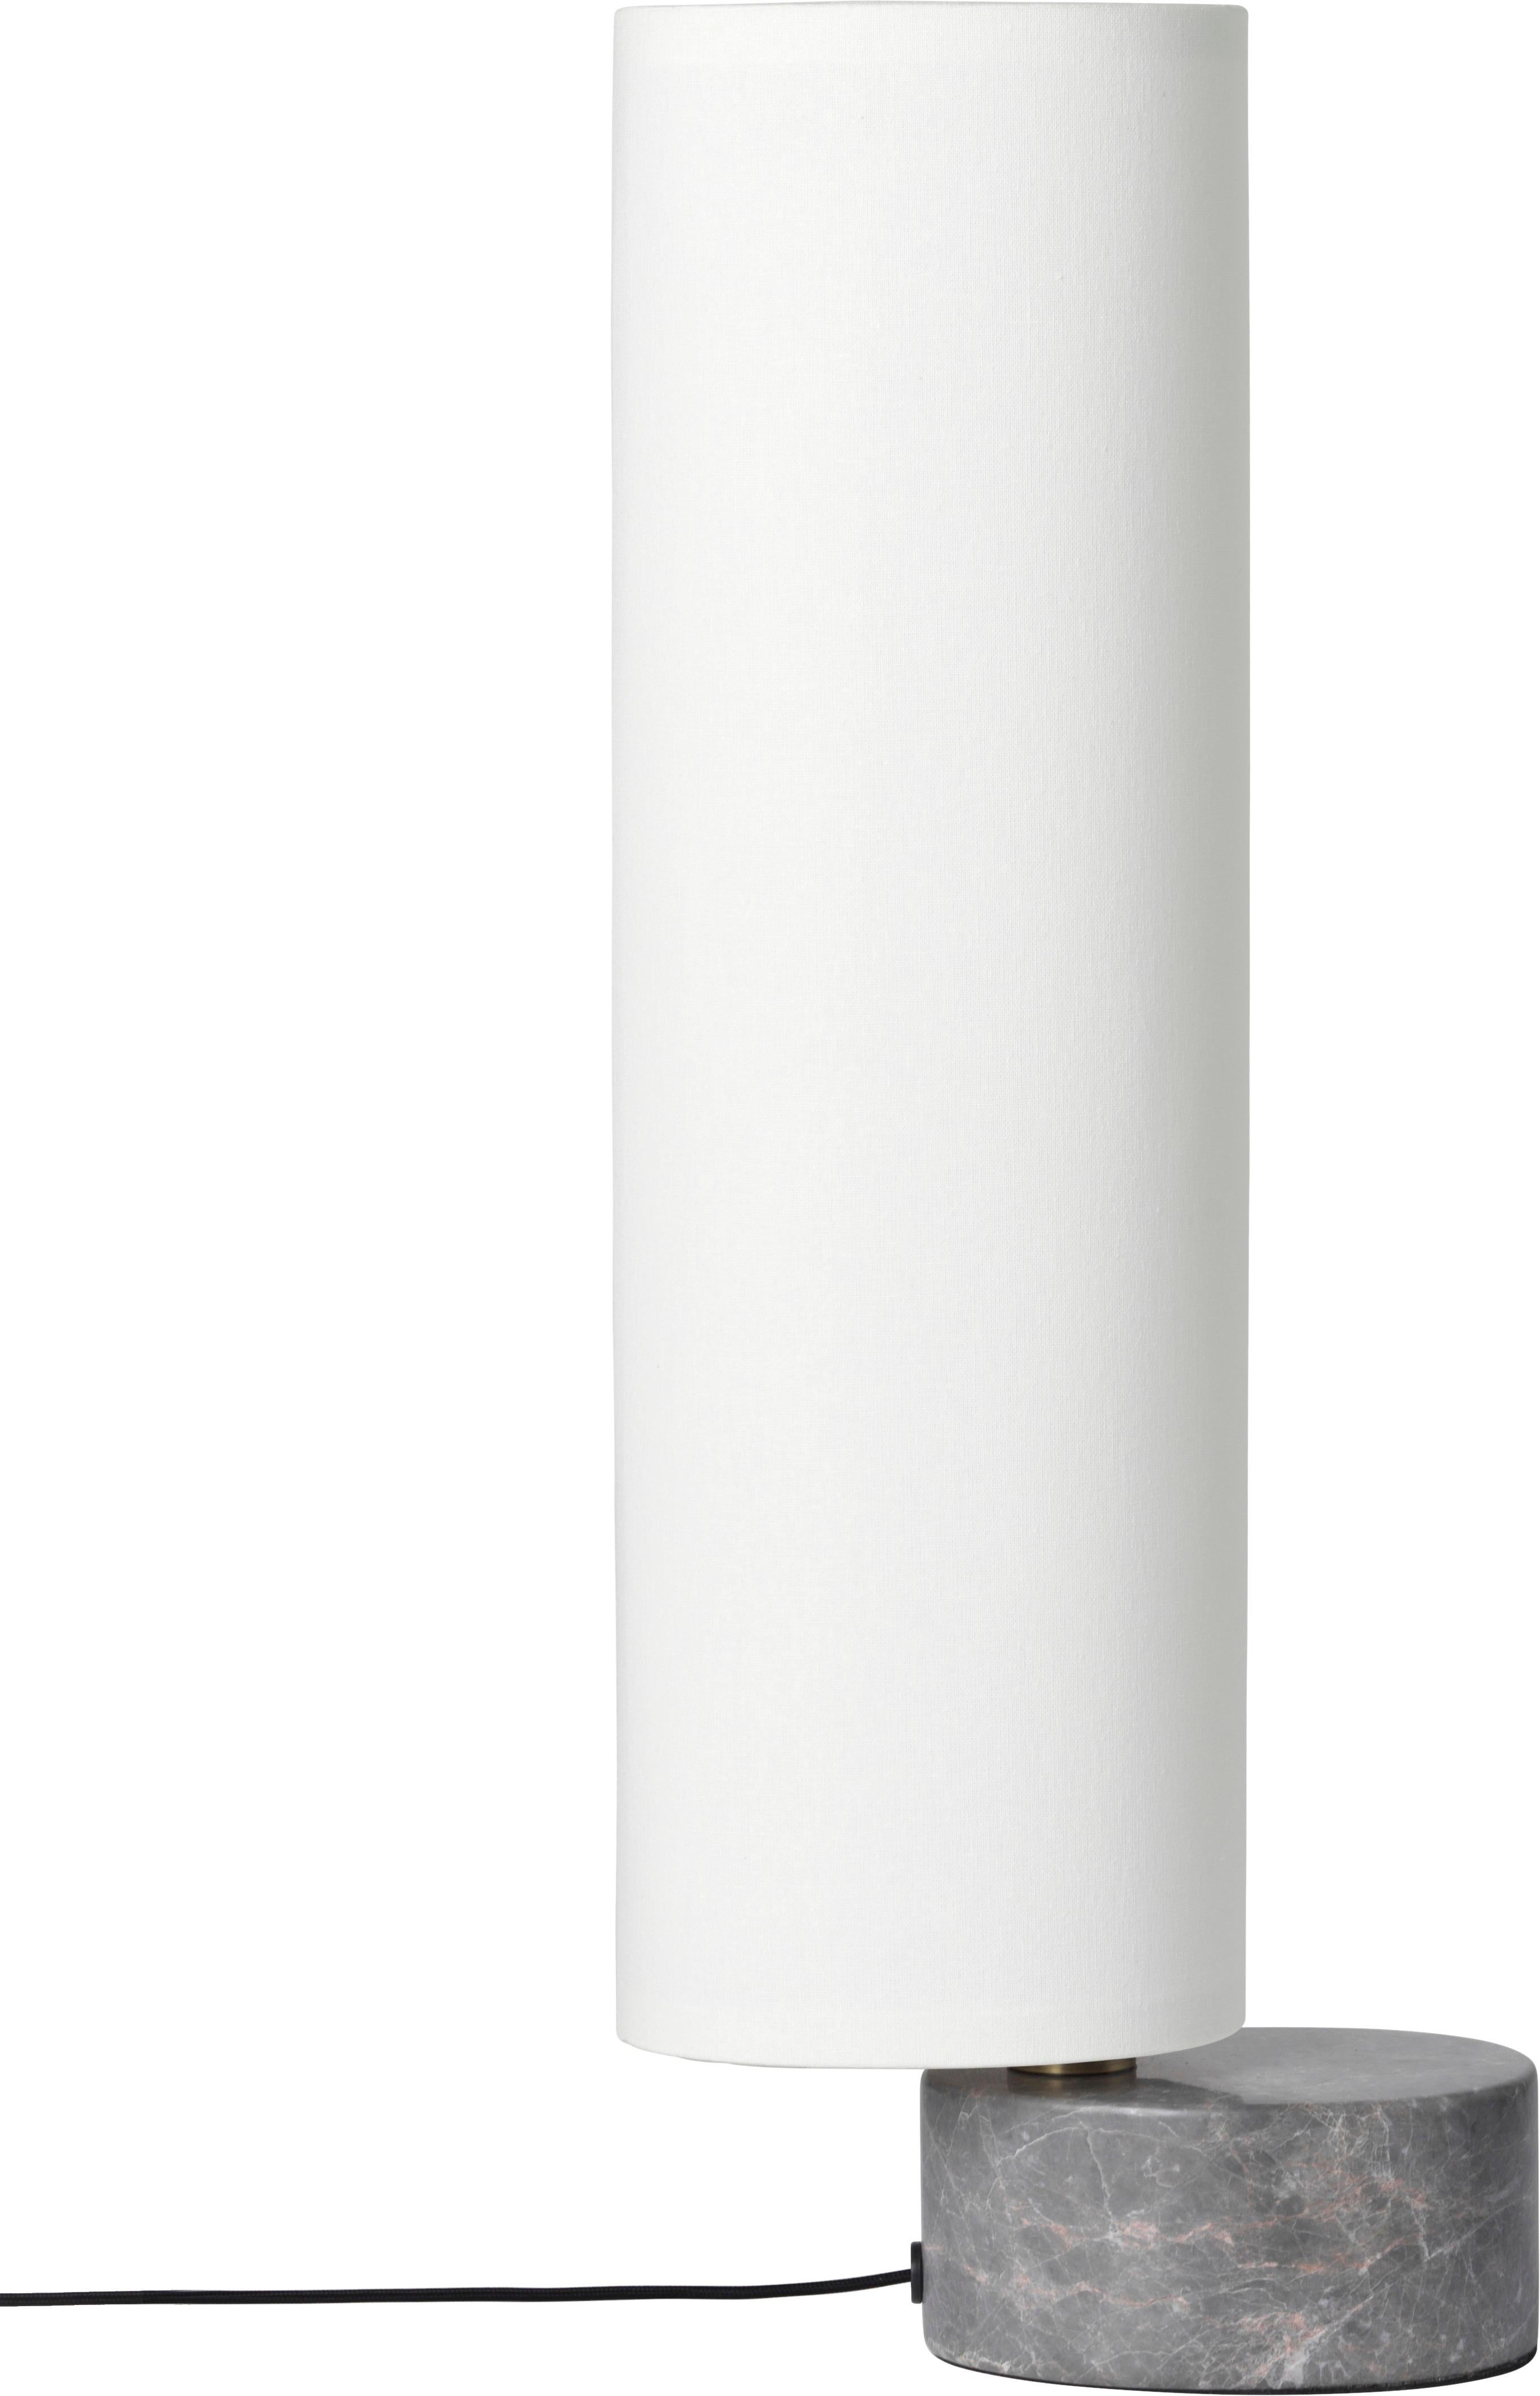 'Unbound' Table Lamp by Space Copenhagen for GUBI with White Linen Shade For Sale 7